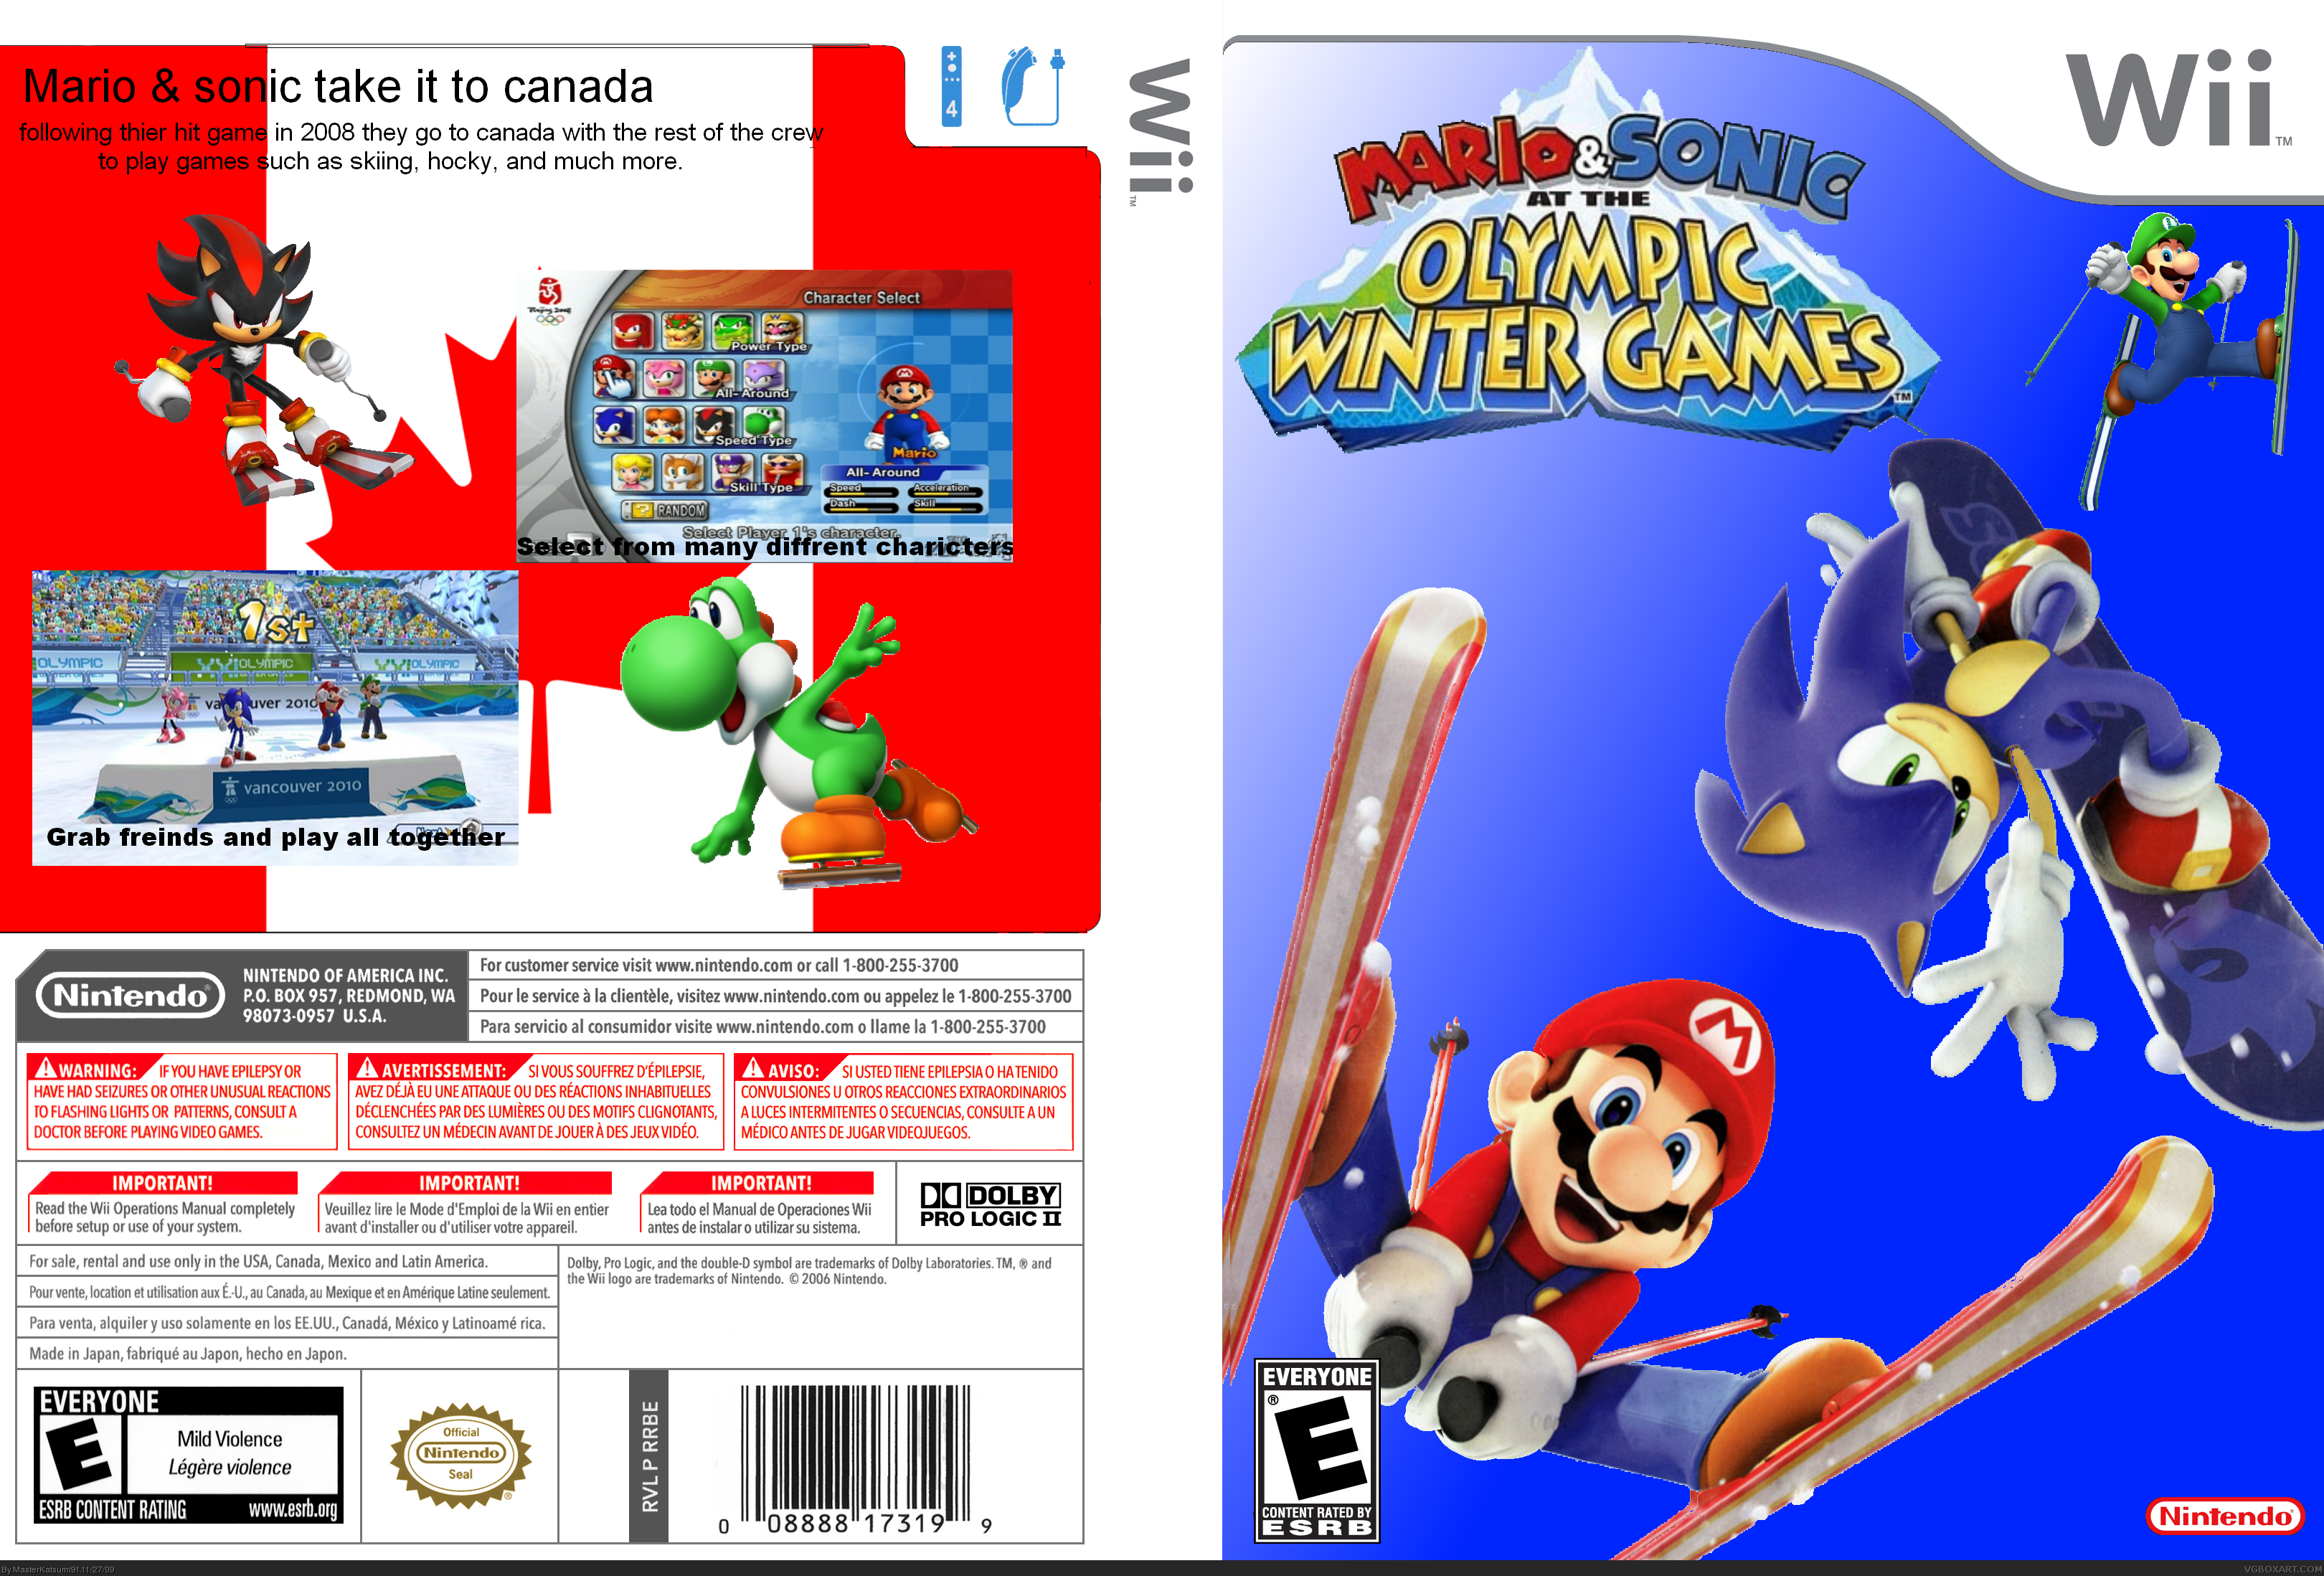 Mario and Sonic at the Olympic Winter Games box cover